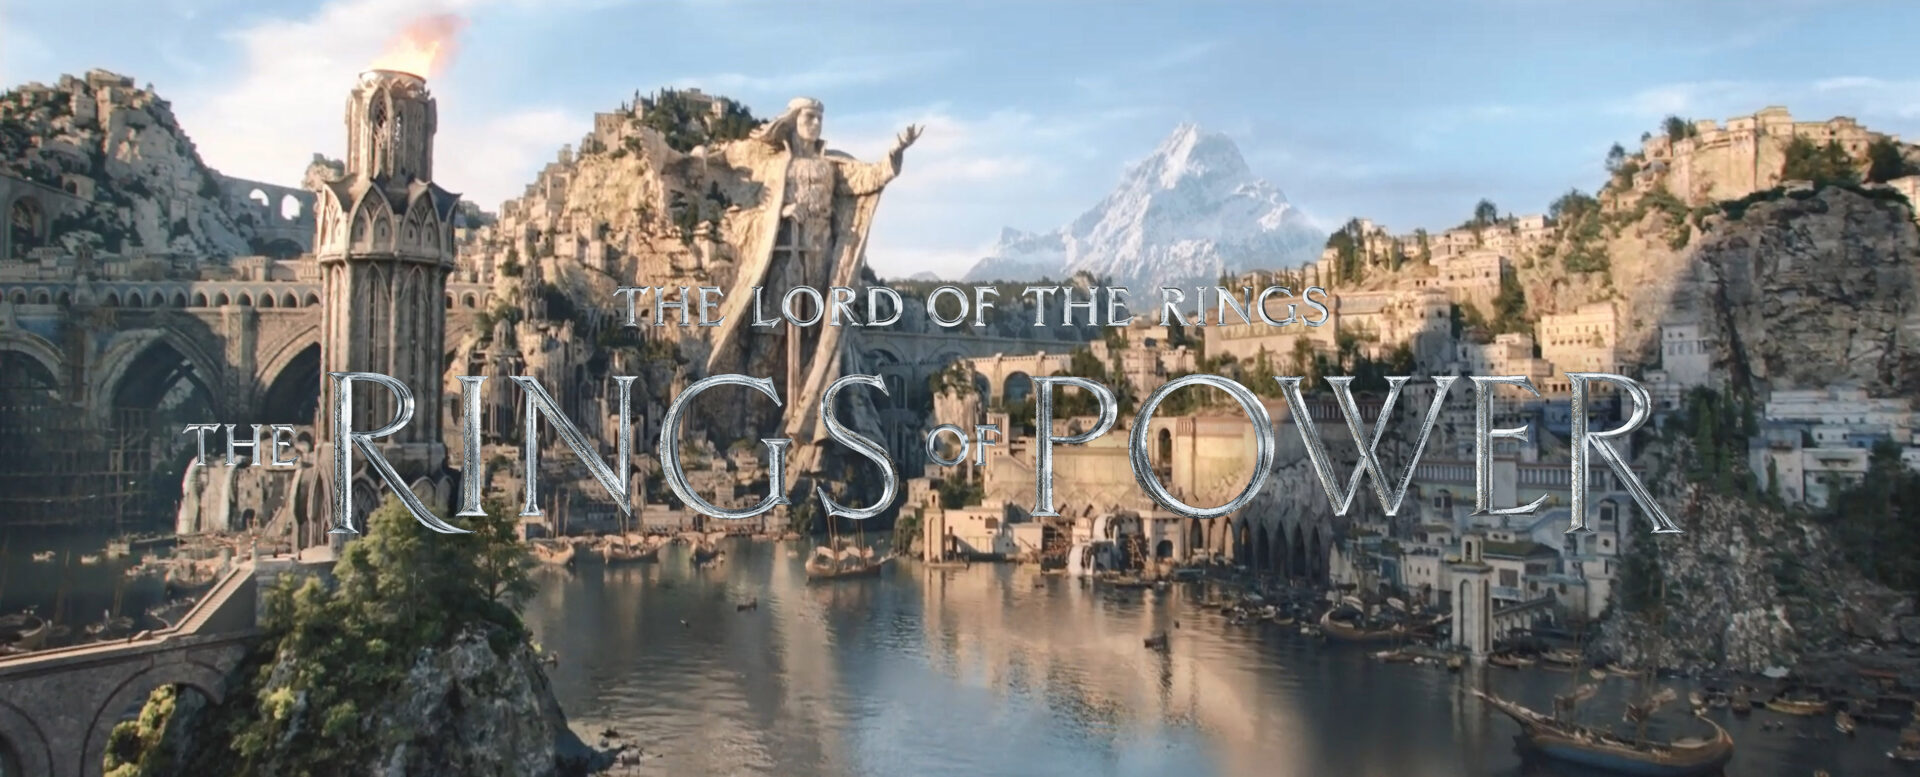 Movie The Lord of the Rings: The Return of the King 4k Ultra HD Wallpaper